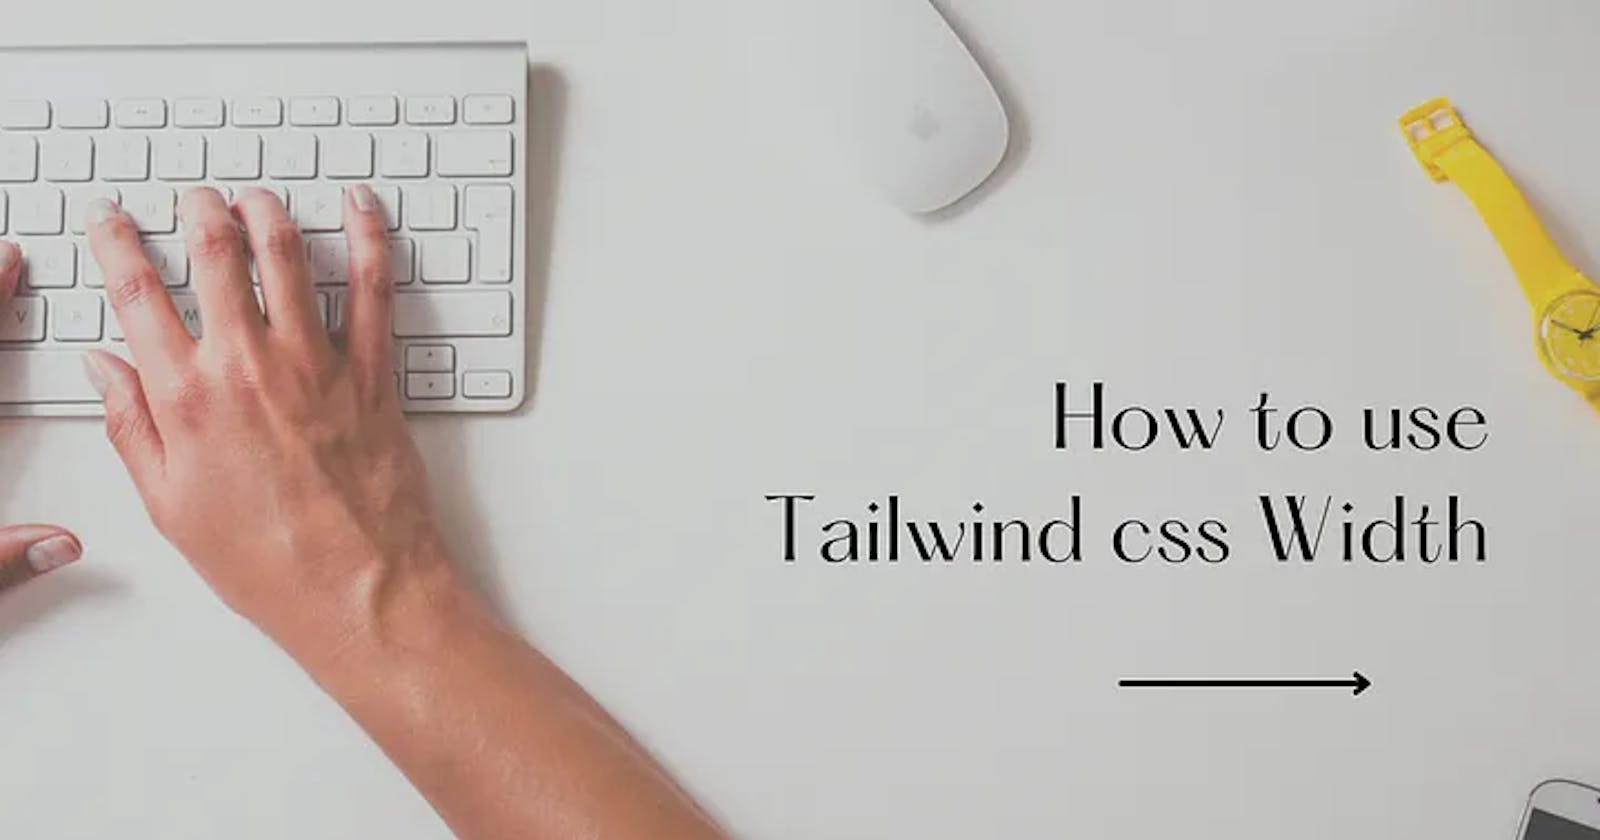 How to use Tailwind CSS Width